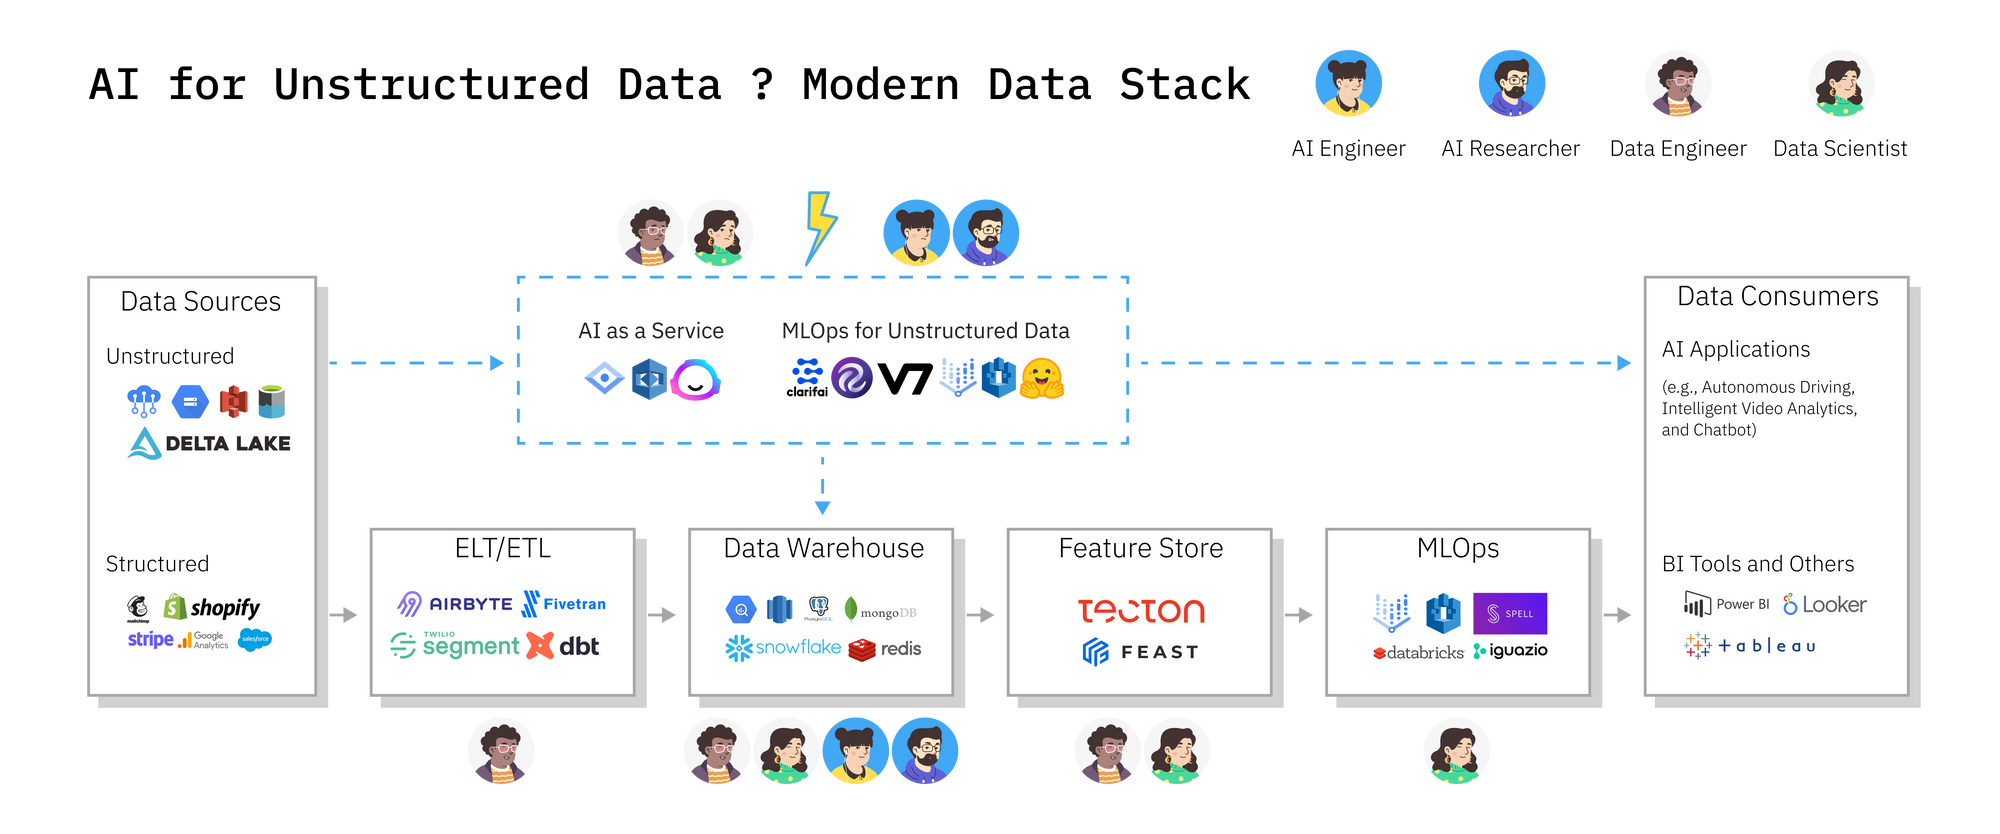 Adding AI for unstructured data into the modern data stack requires extra functions. We use dash arrows to indicate non-trivial engineering efforts to integrate unstructured data processing with existing stack performed by either Data Engineers or AI Engineers.